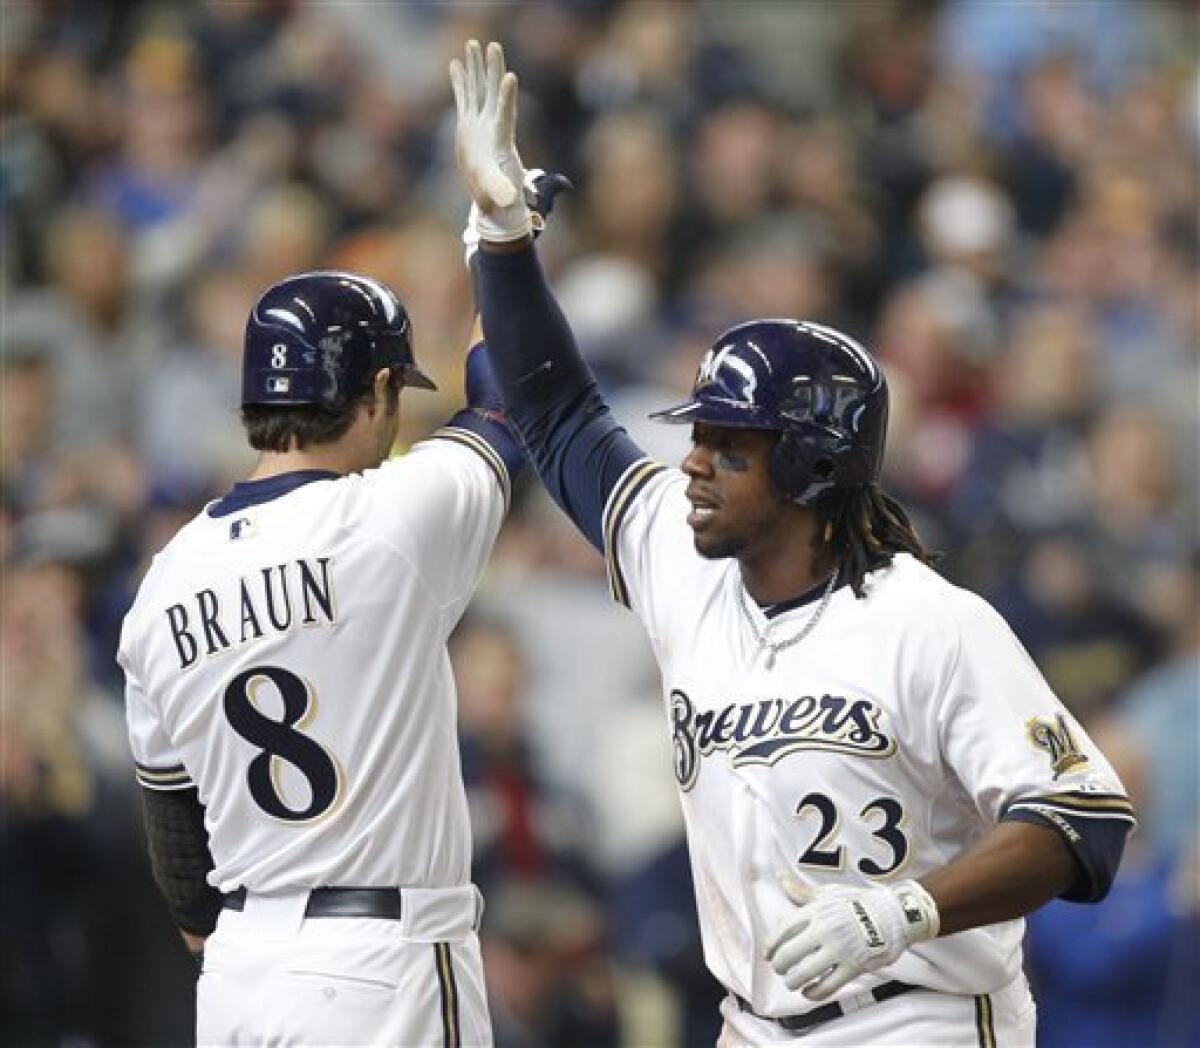 Brewers still winless, lose 2-1 to Braves - The San Diego Union-Tribune